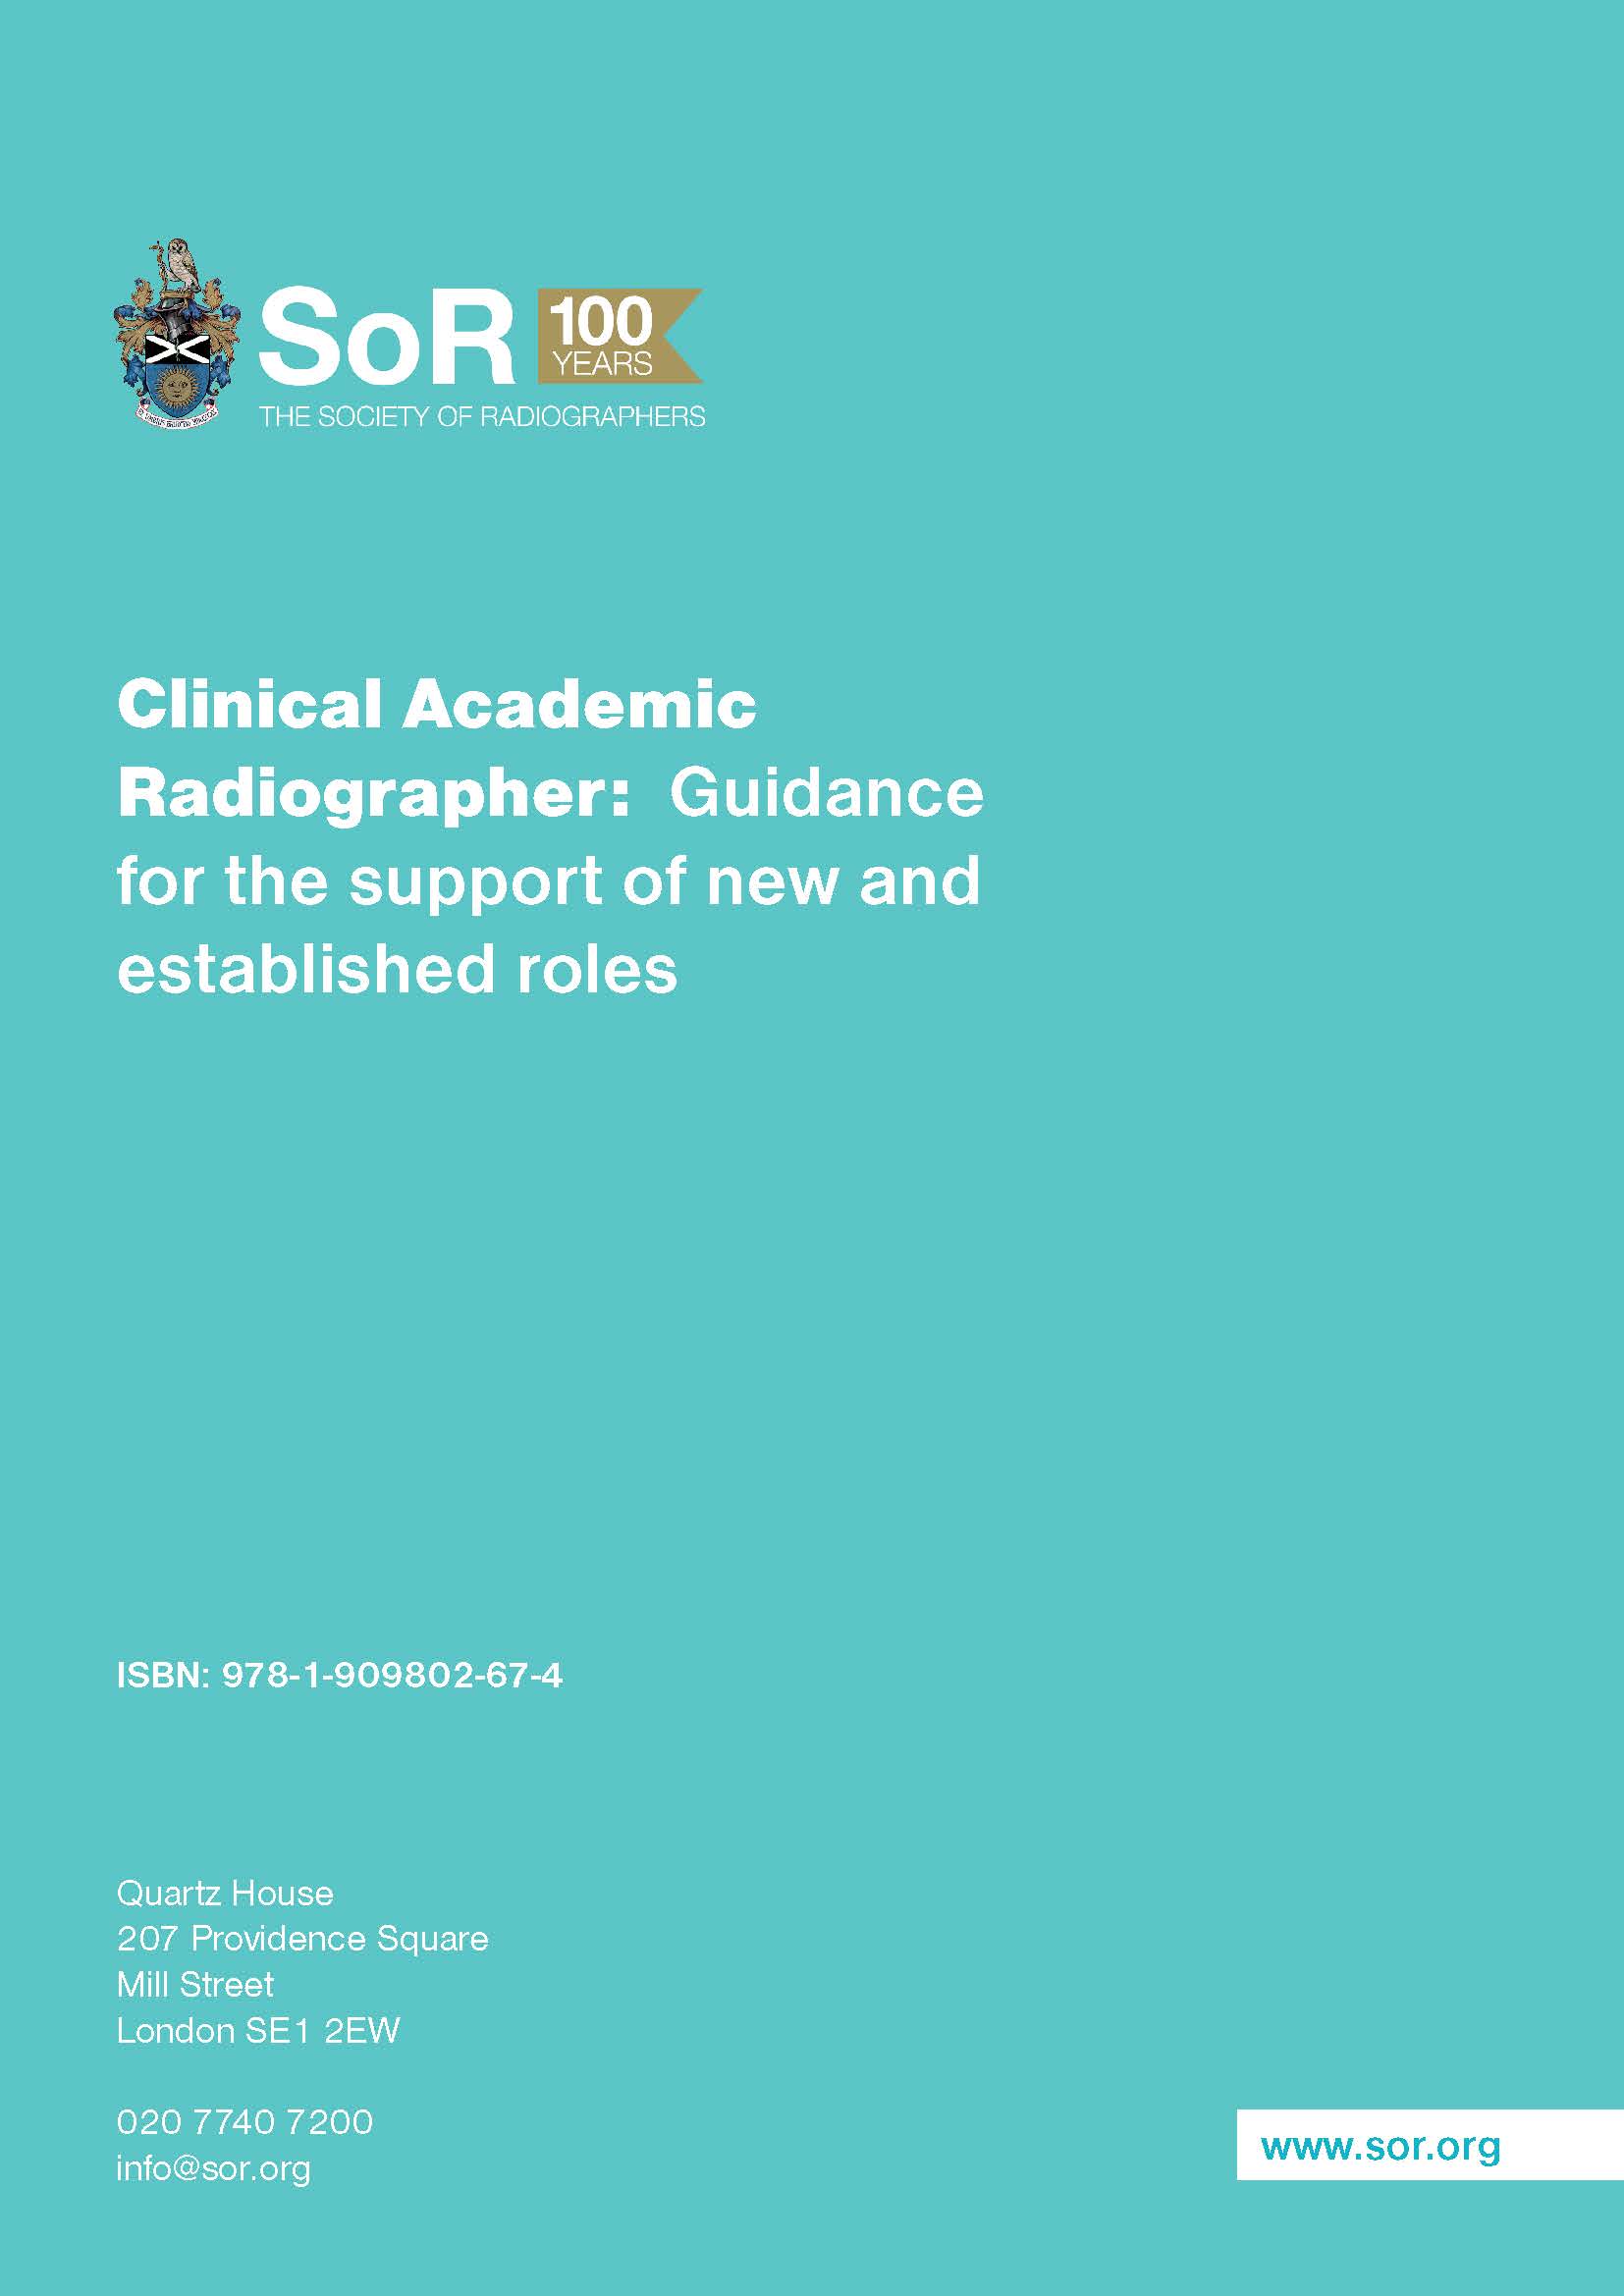 Clinical Academic Radiographer: guidance for the support of new and established roles.